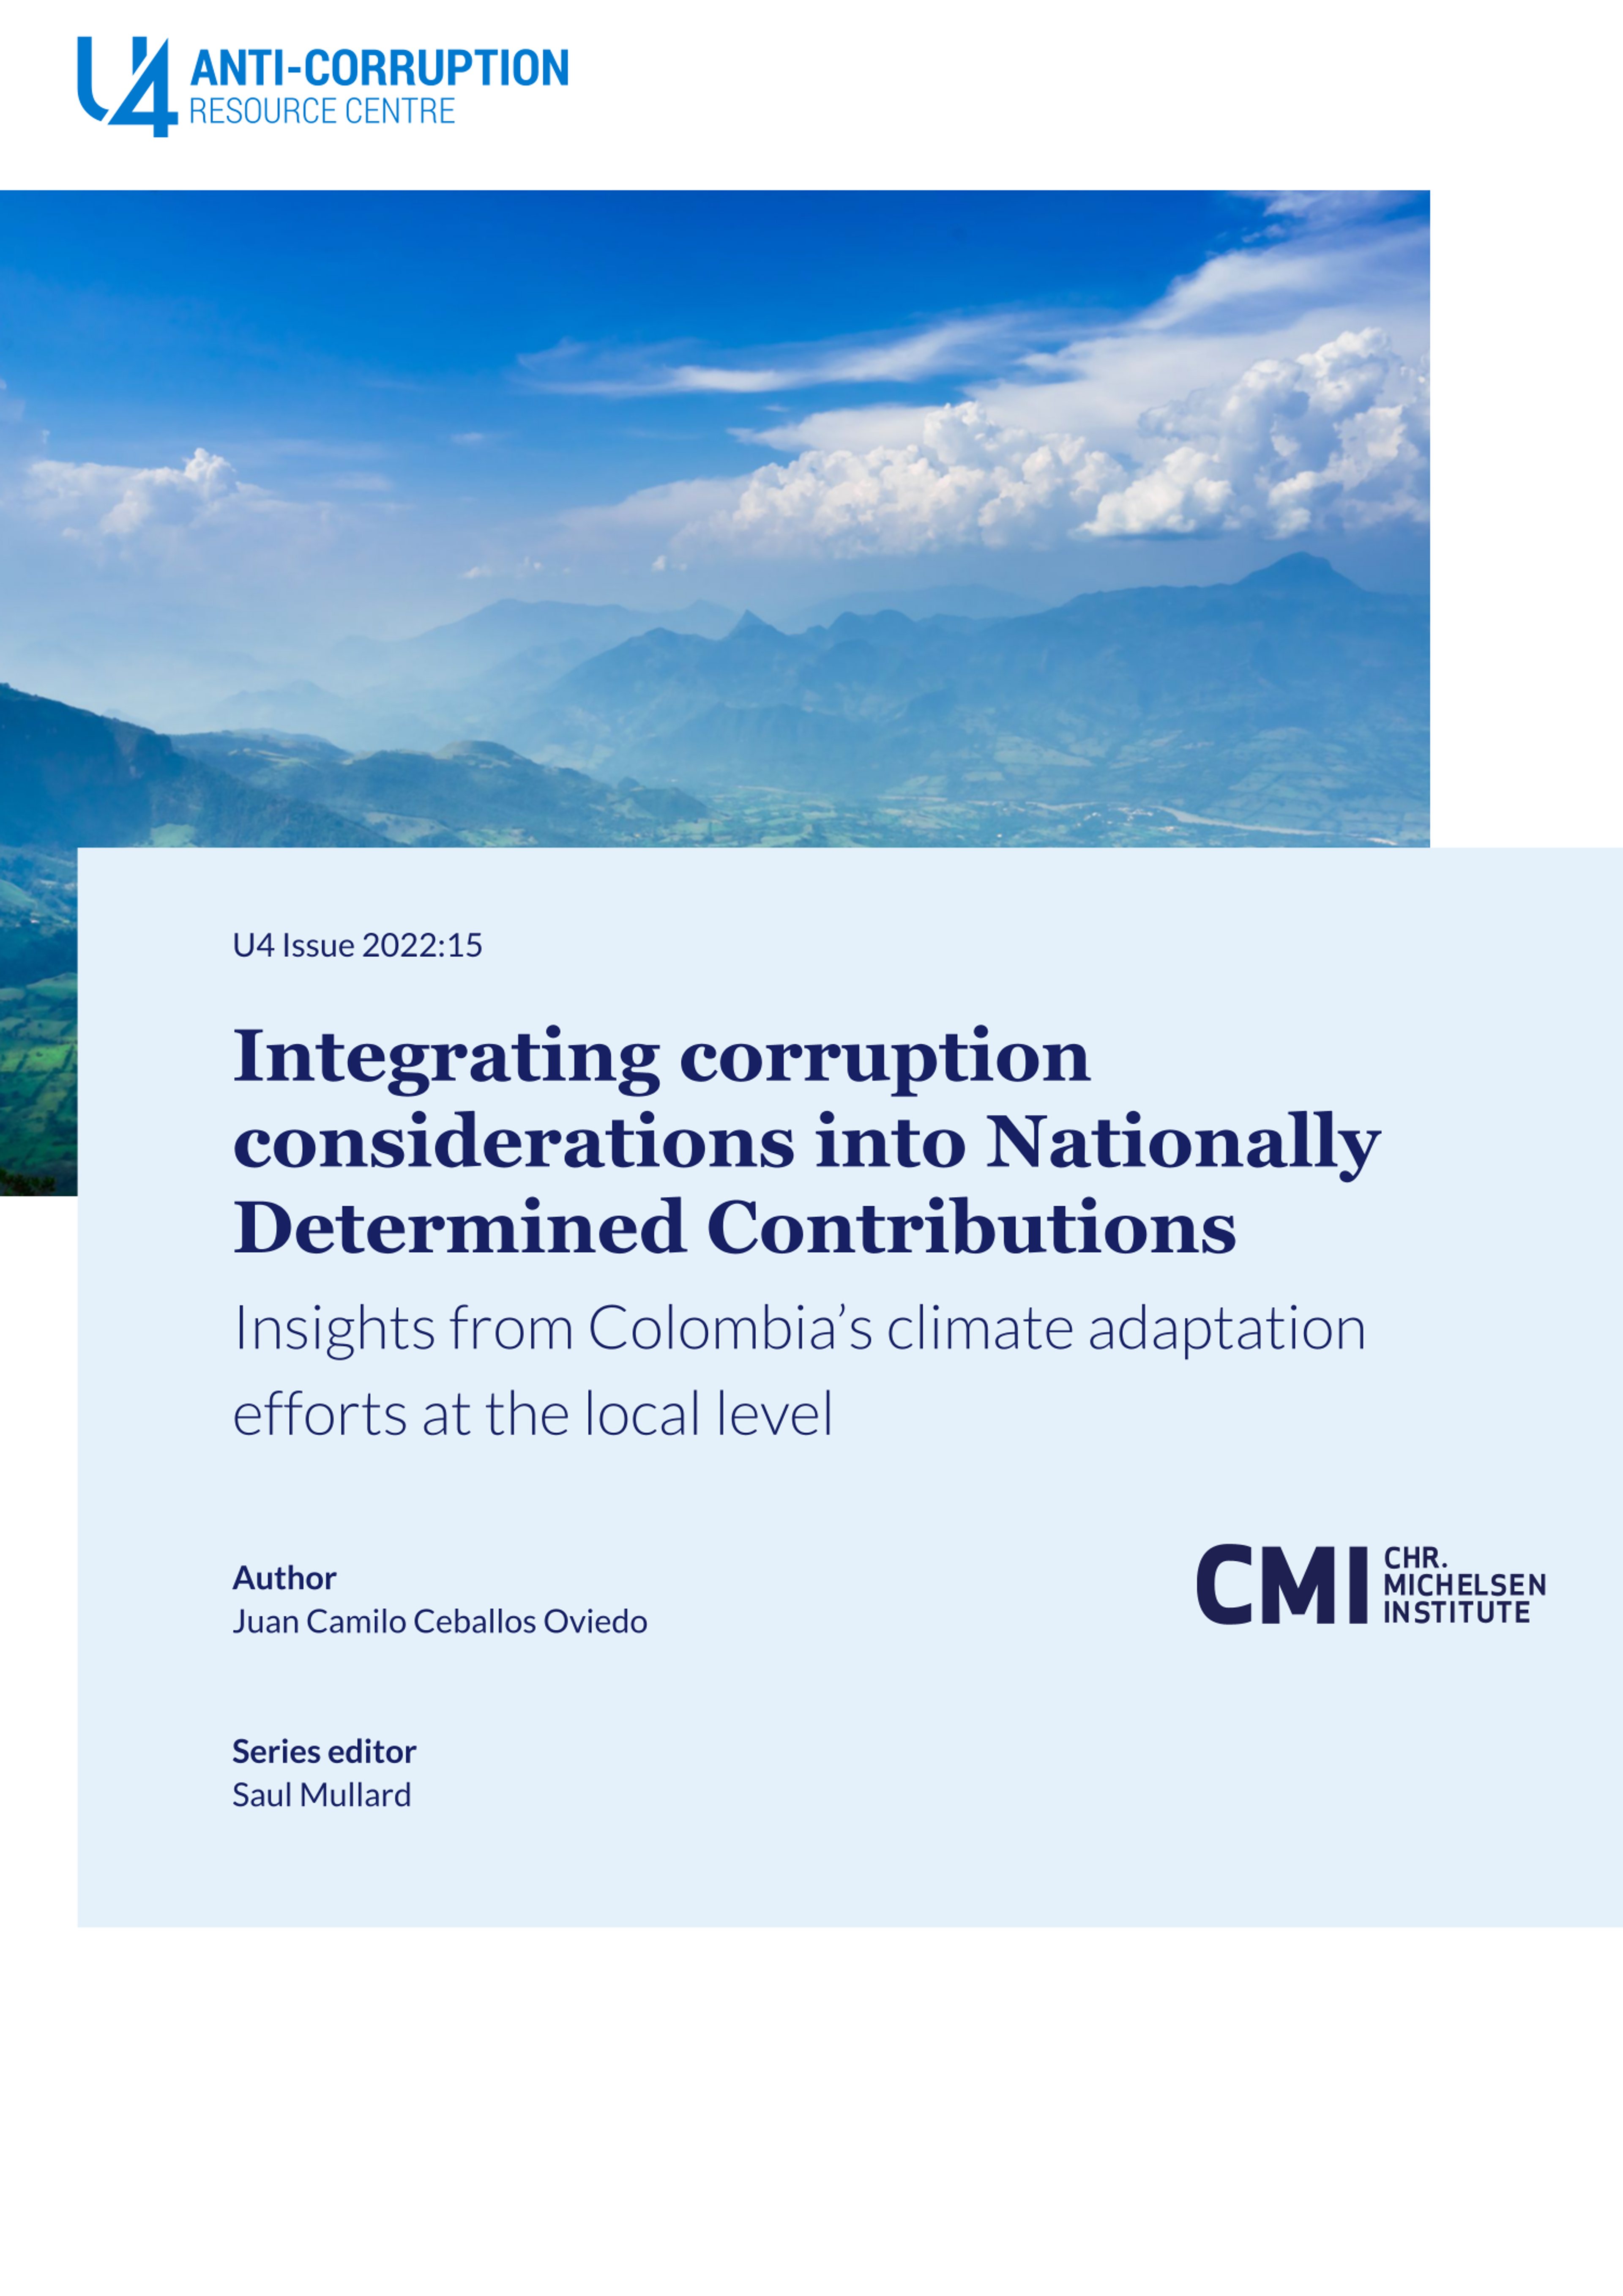 Integrating corruption considerations into Nationally Determined Contributions